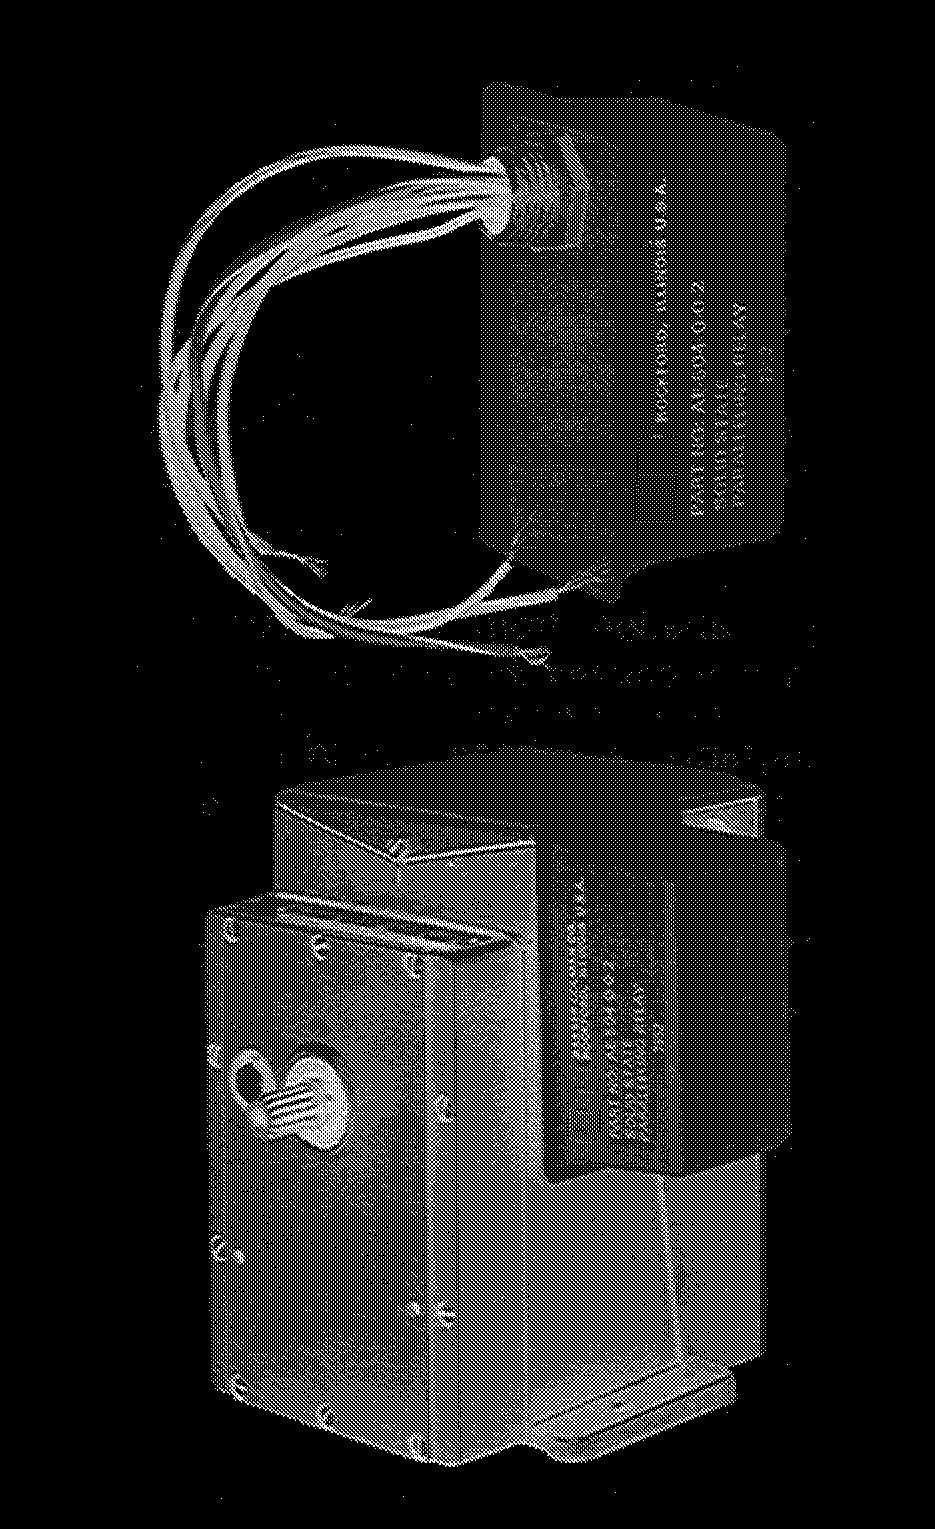 Parallel Up to three actuators, each equipped with an AE-504, can be operated from a proportionally controlled actuator equipped with an AM-332 potentiometer kit with a 100 to 135 ohm slidewire for